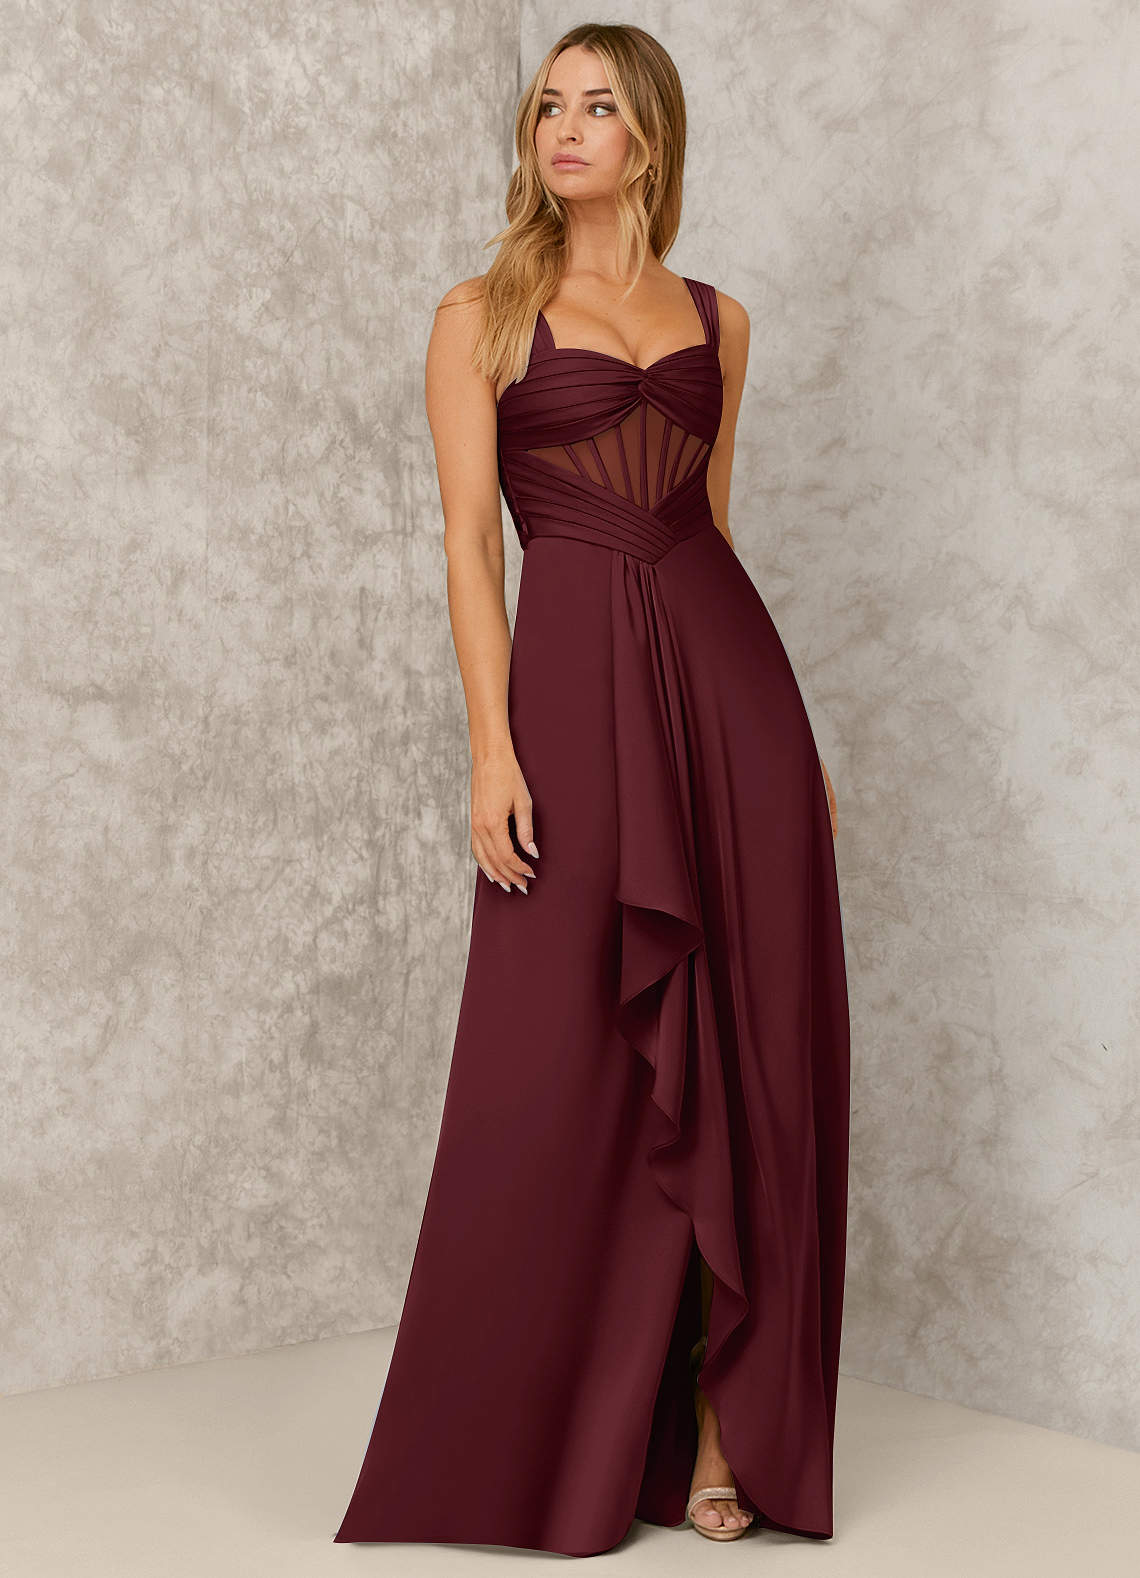 Corseted Sweetheart Stretch Satin A-line Dress Bridesmaid Dresses | Azazie